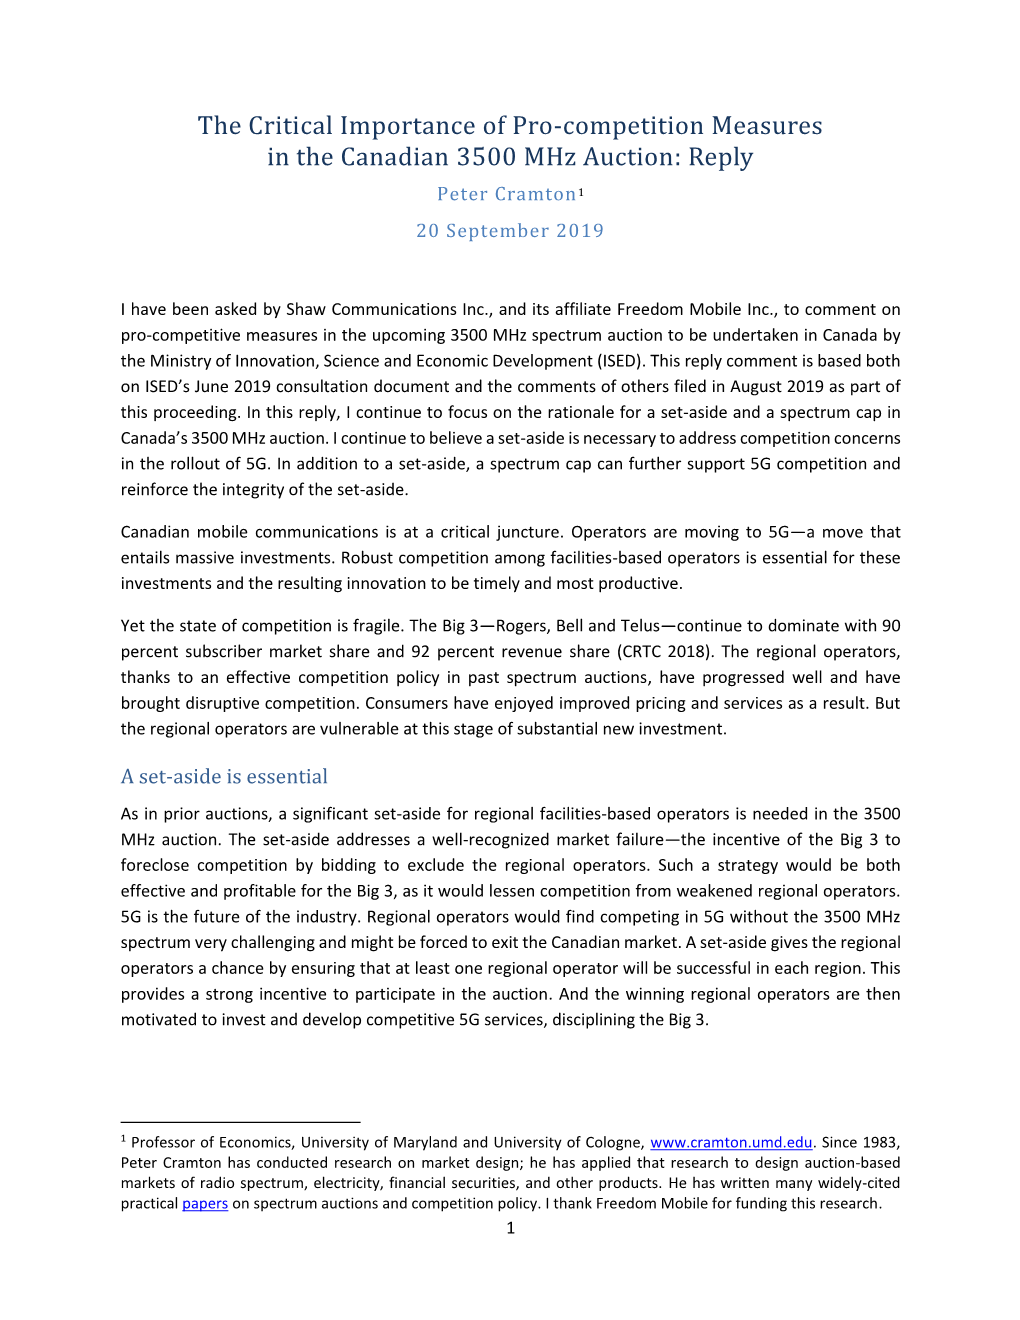 The Critical Importance of Pro-Competition Measures in the Canadian 3500 Mhz Auction: Reply Peter Cramton 1 20 September 2019